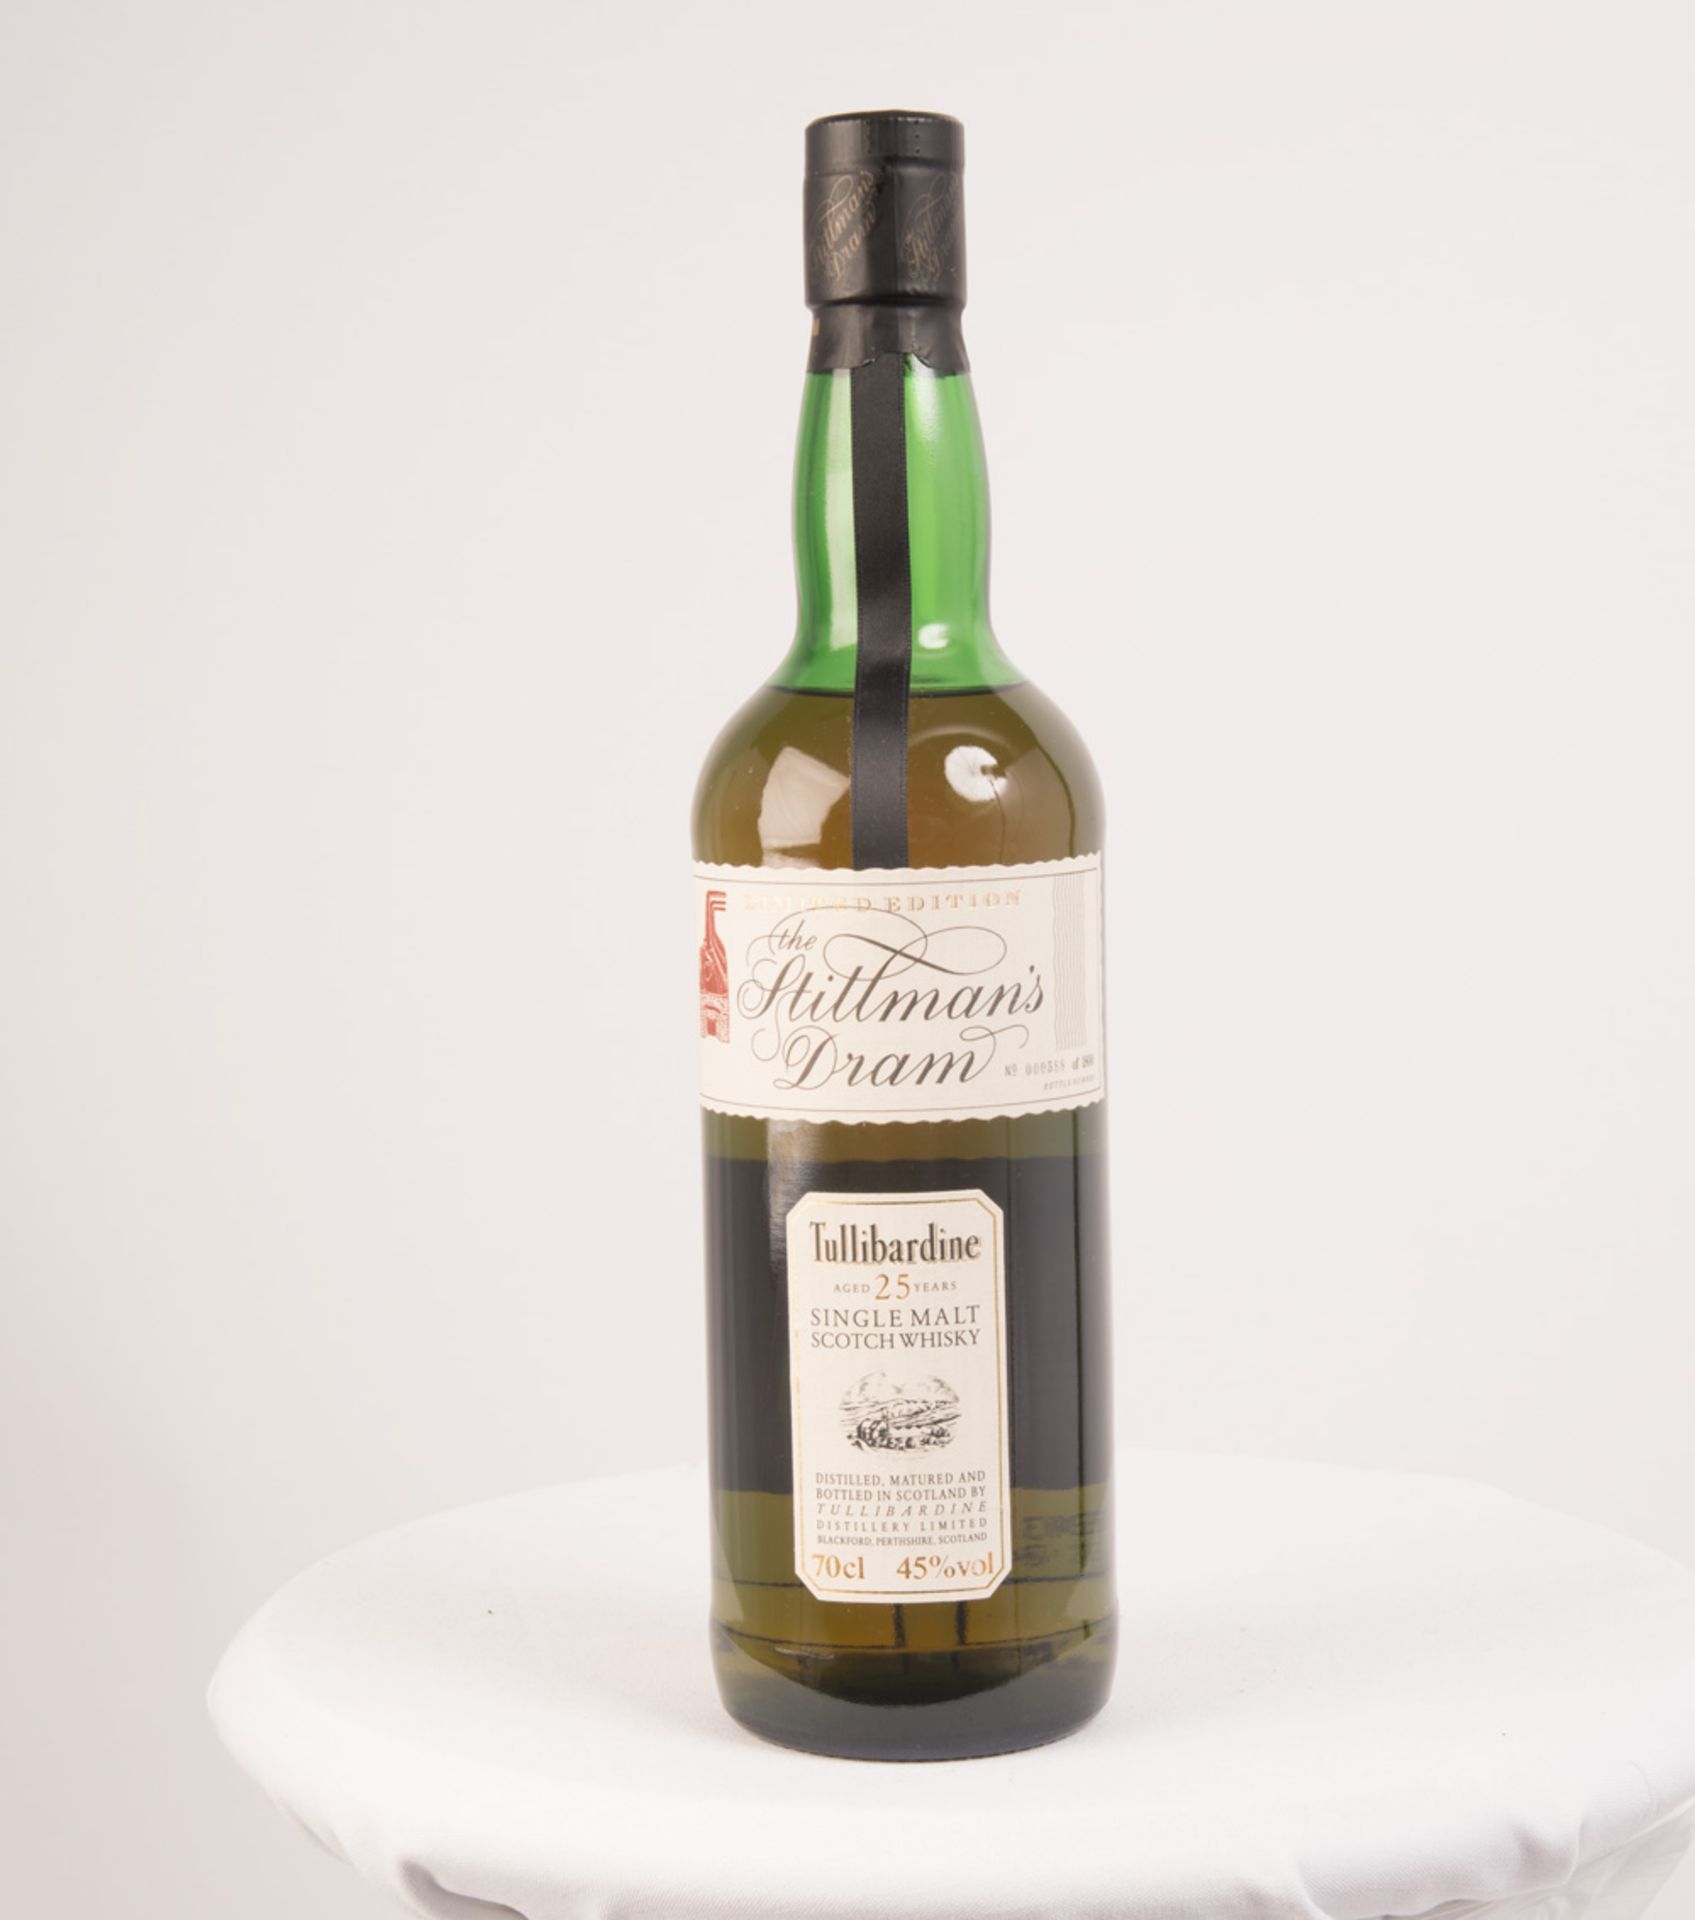 TULLIBARDINE 25 YO. Limited edition. The Stillman's Dram has been bottled and selected as part of